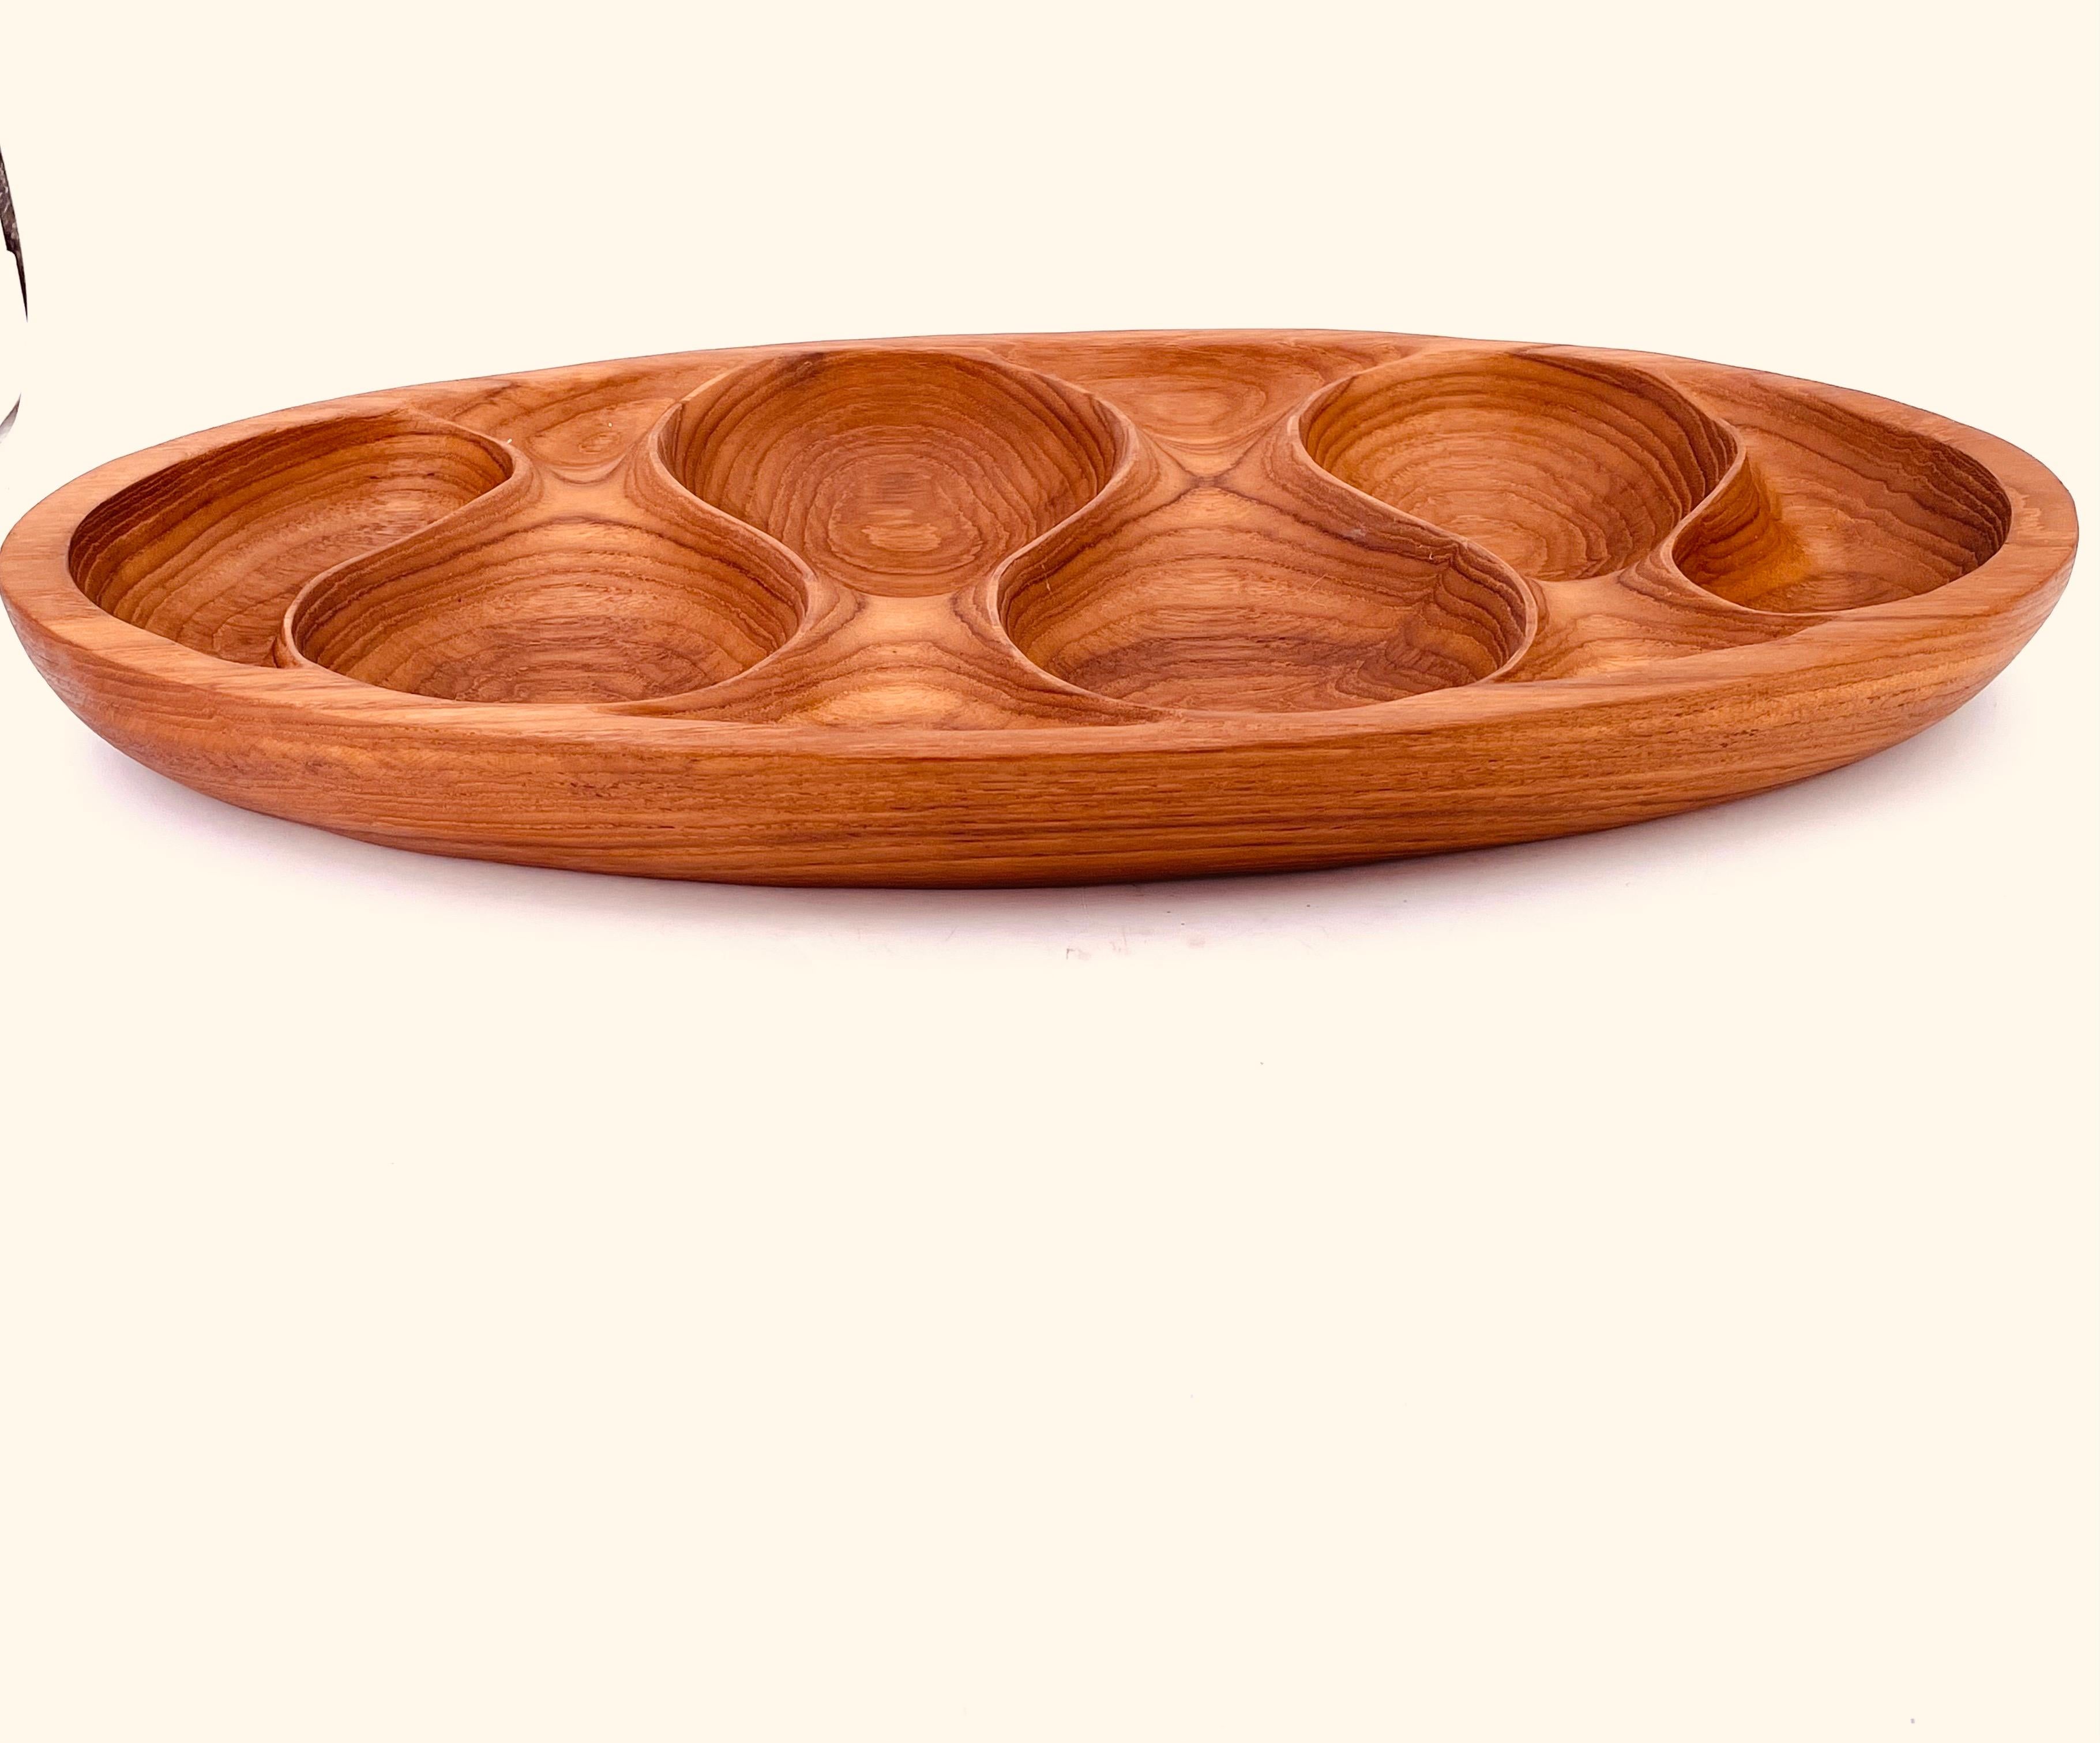 Teak divided catch-all, nut tray or jewelry holder, circa the 1960s. solid teak large great condition.